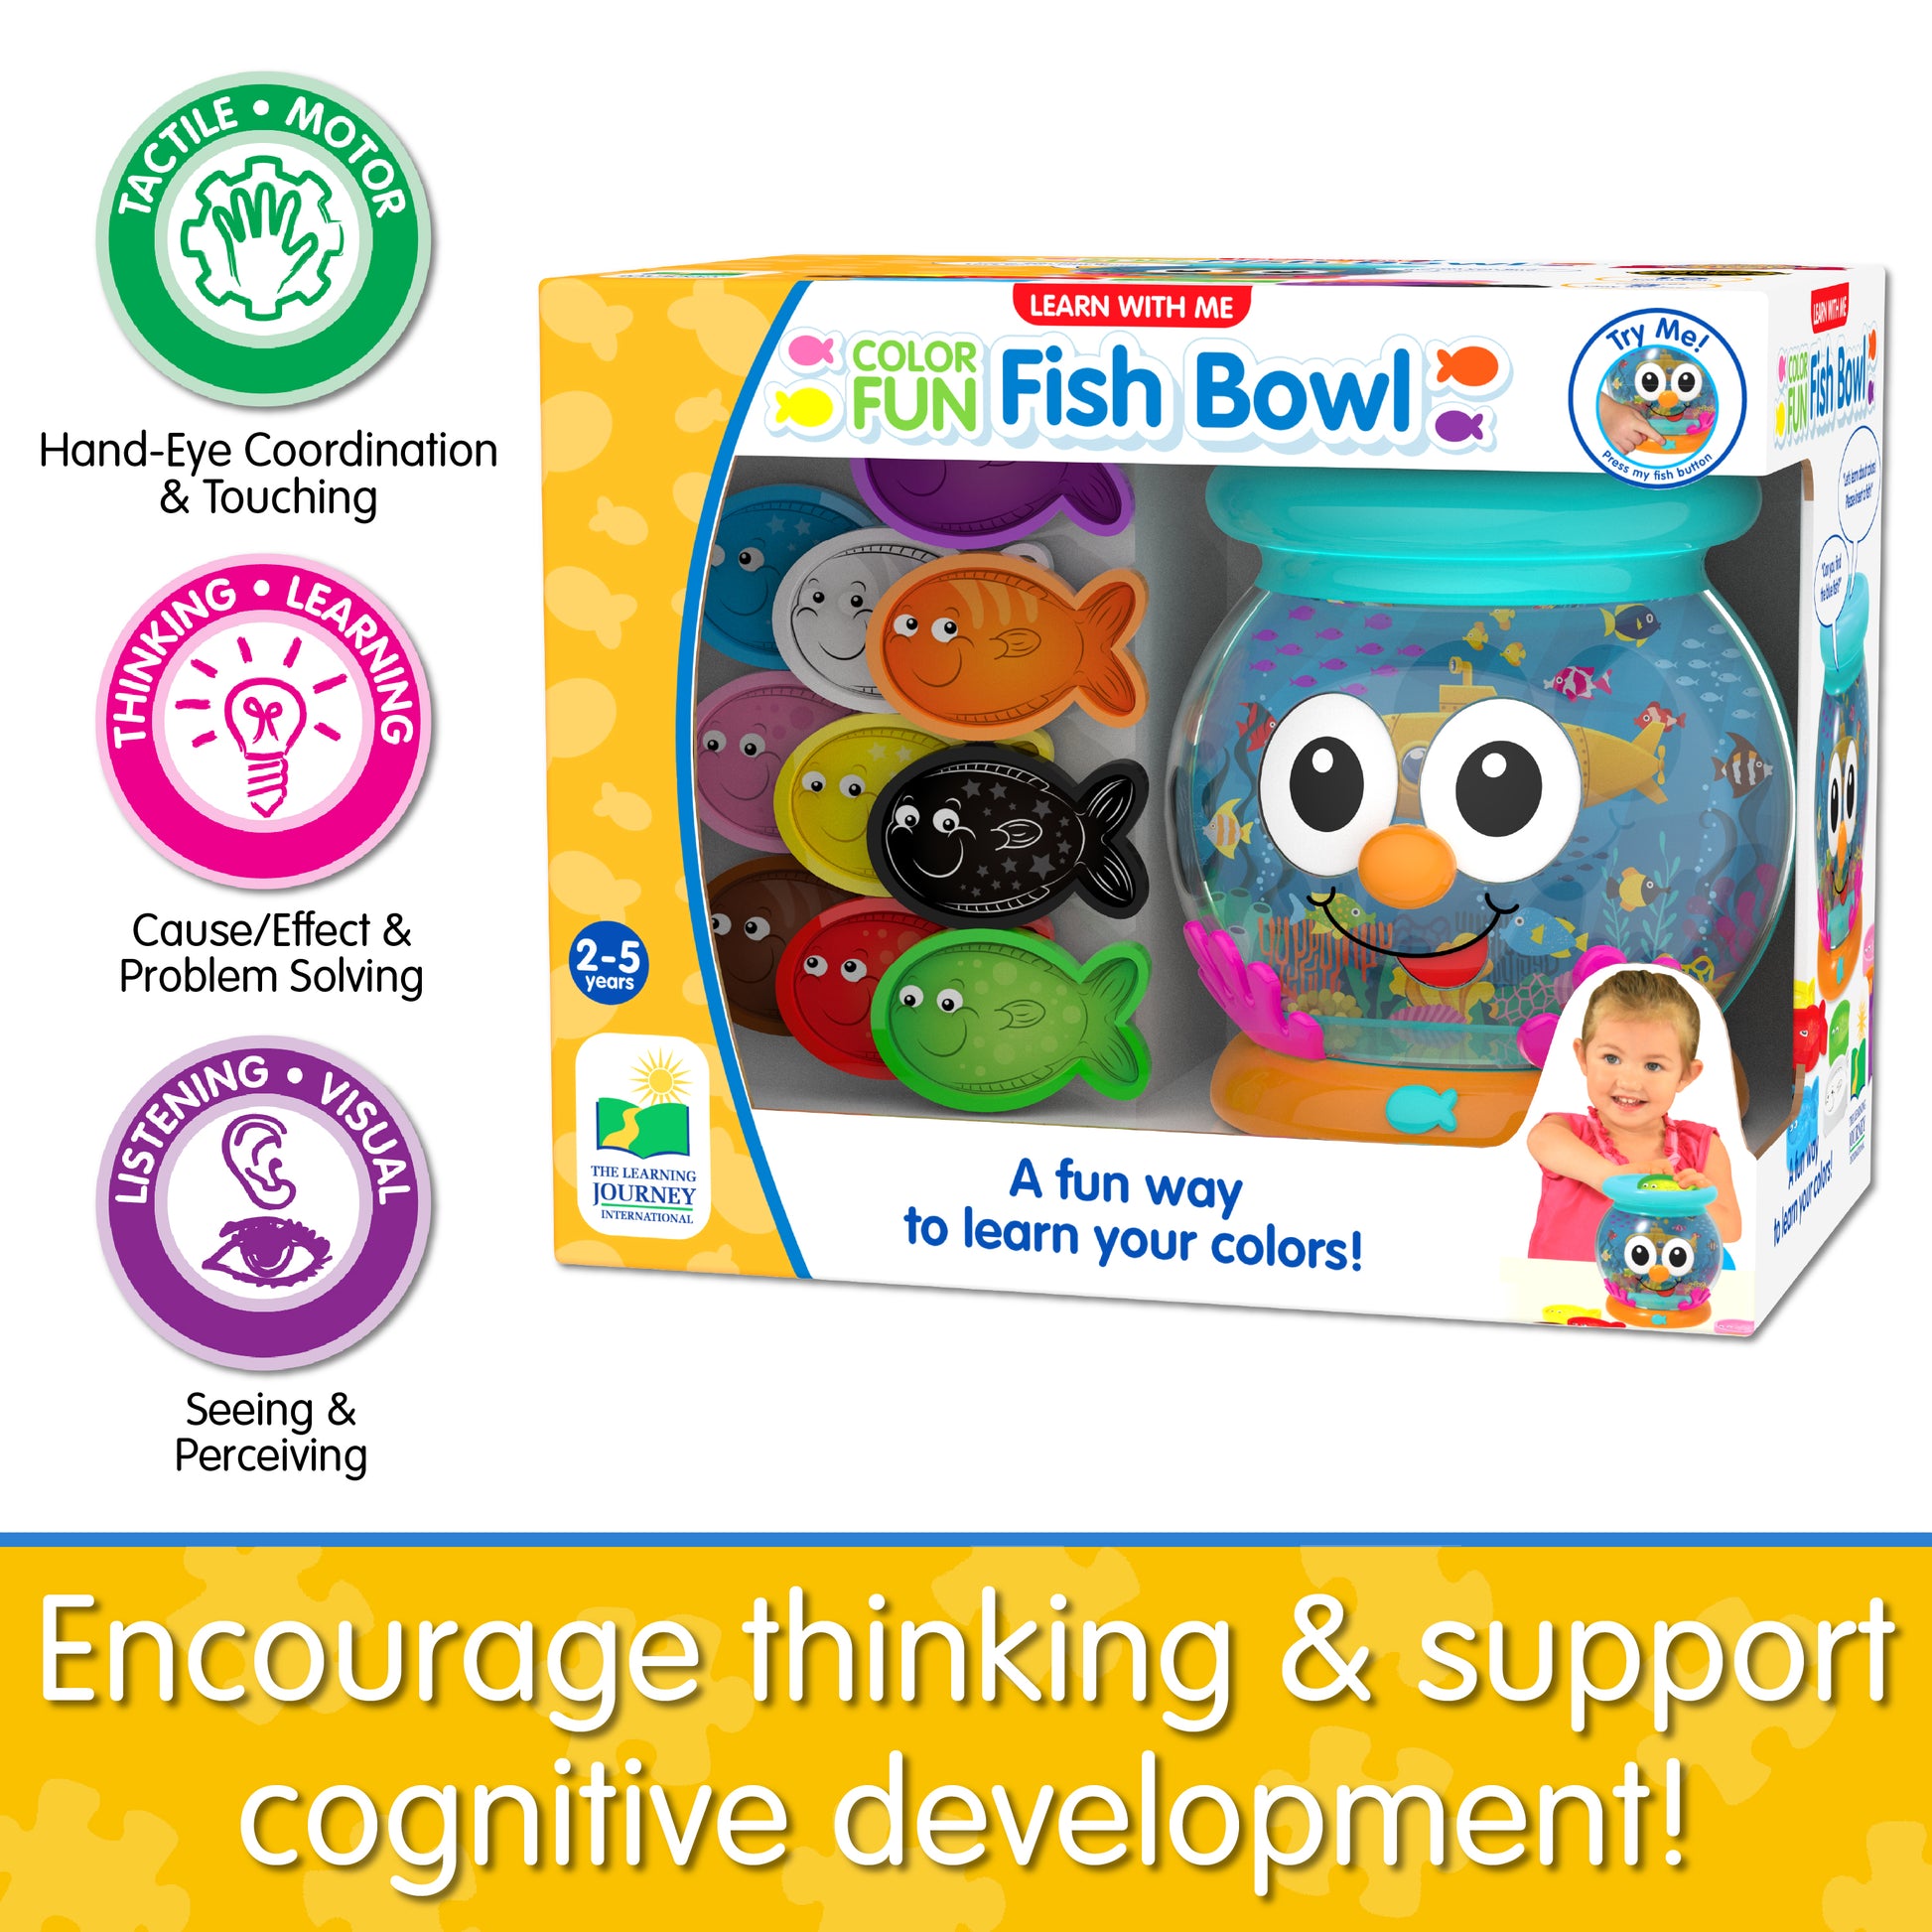 Infographic of Learn With Me Color Fun Fish Bowl's educational benefits that reads "Encourage thinking and support cognitive development!"